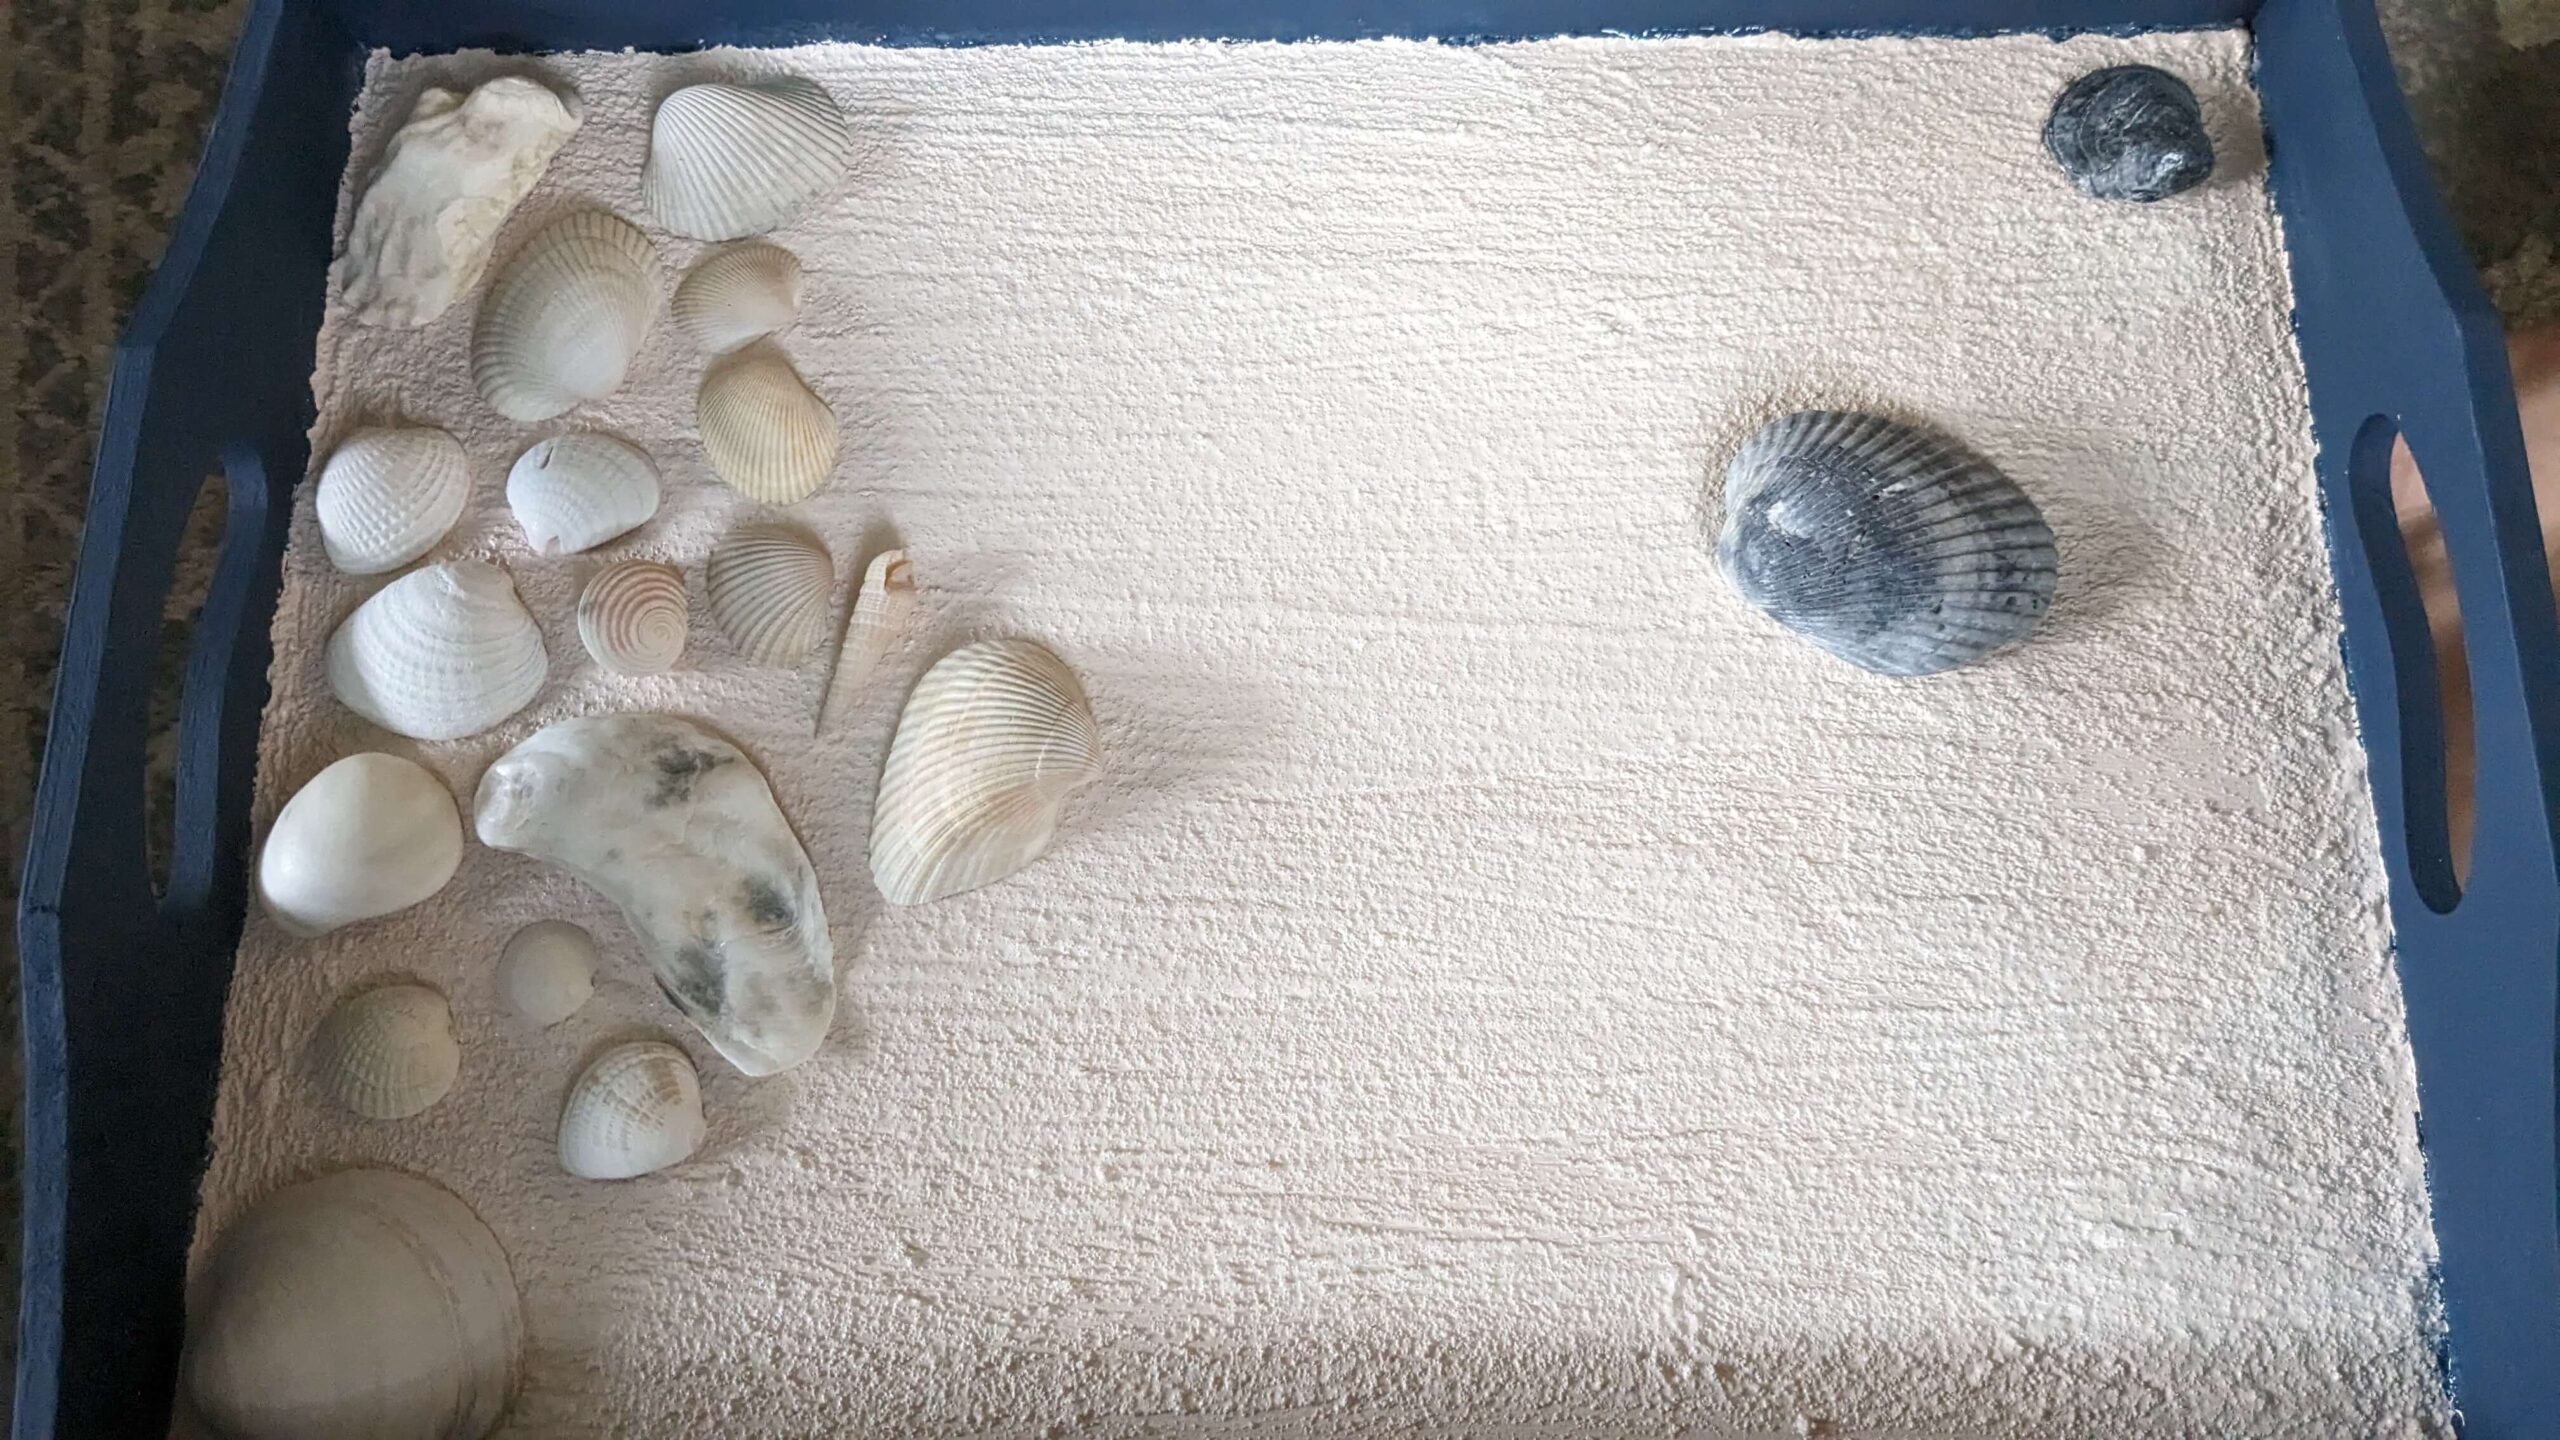 several white and black seashells on a textured painted wooden tray